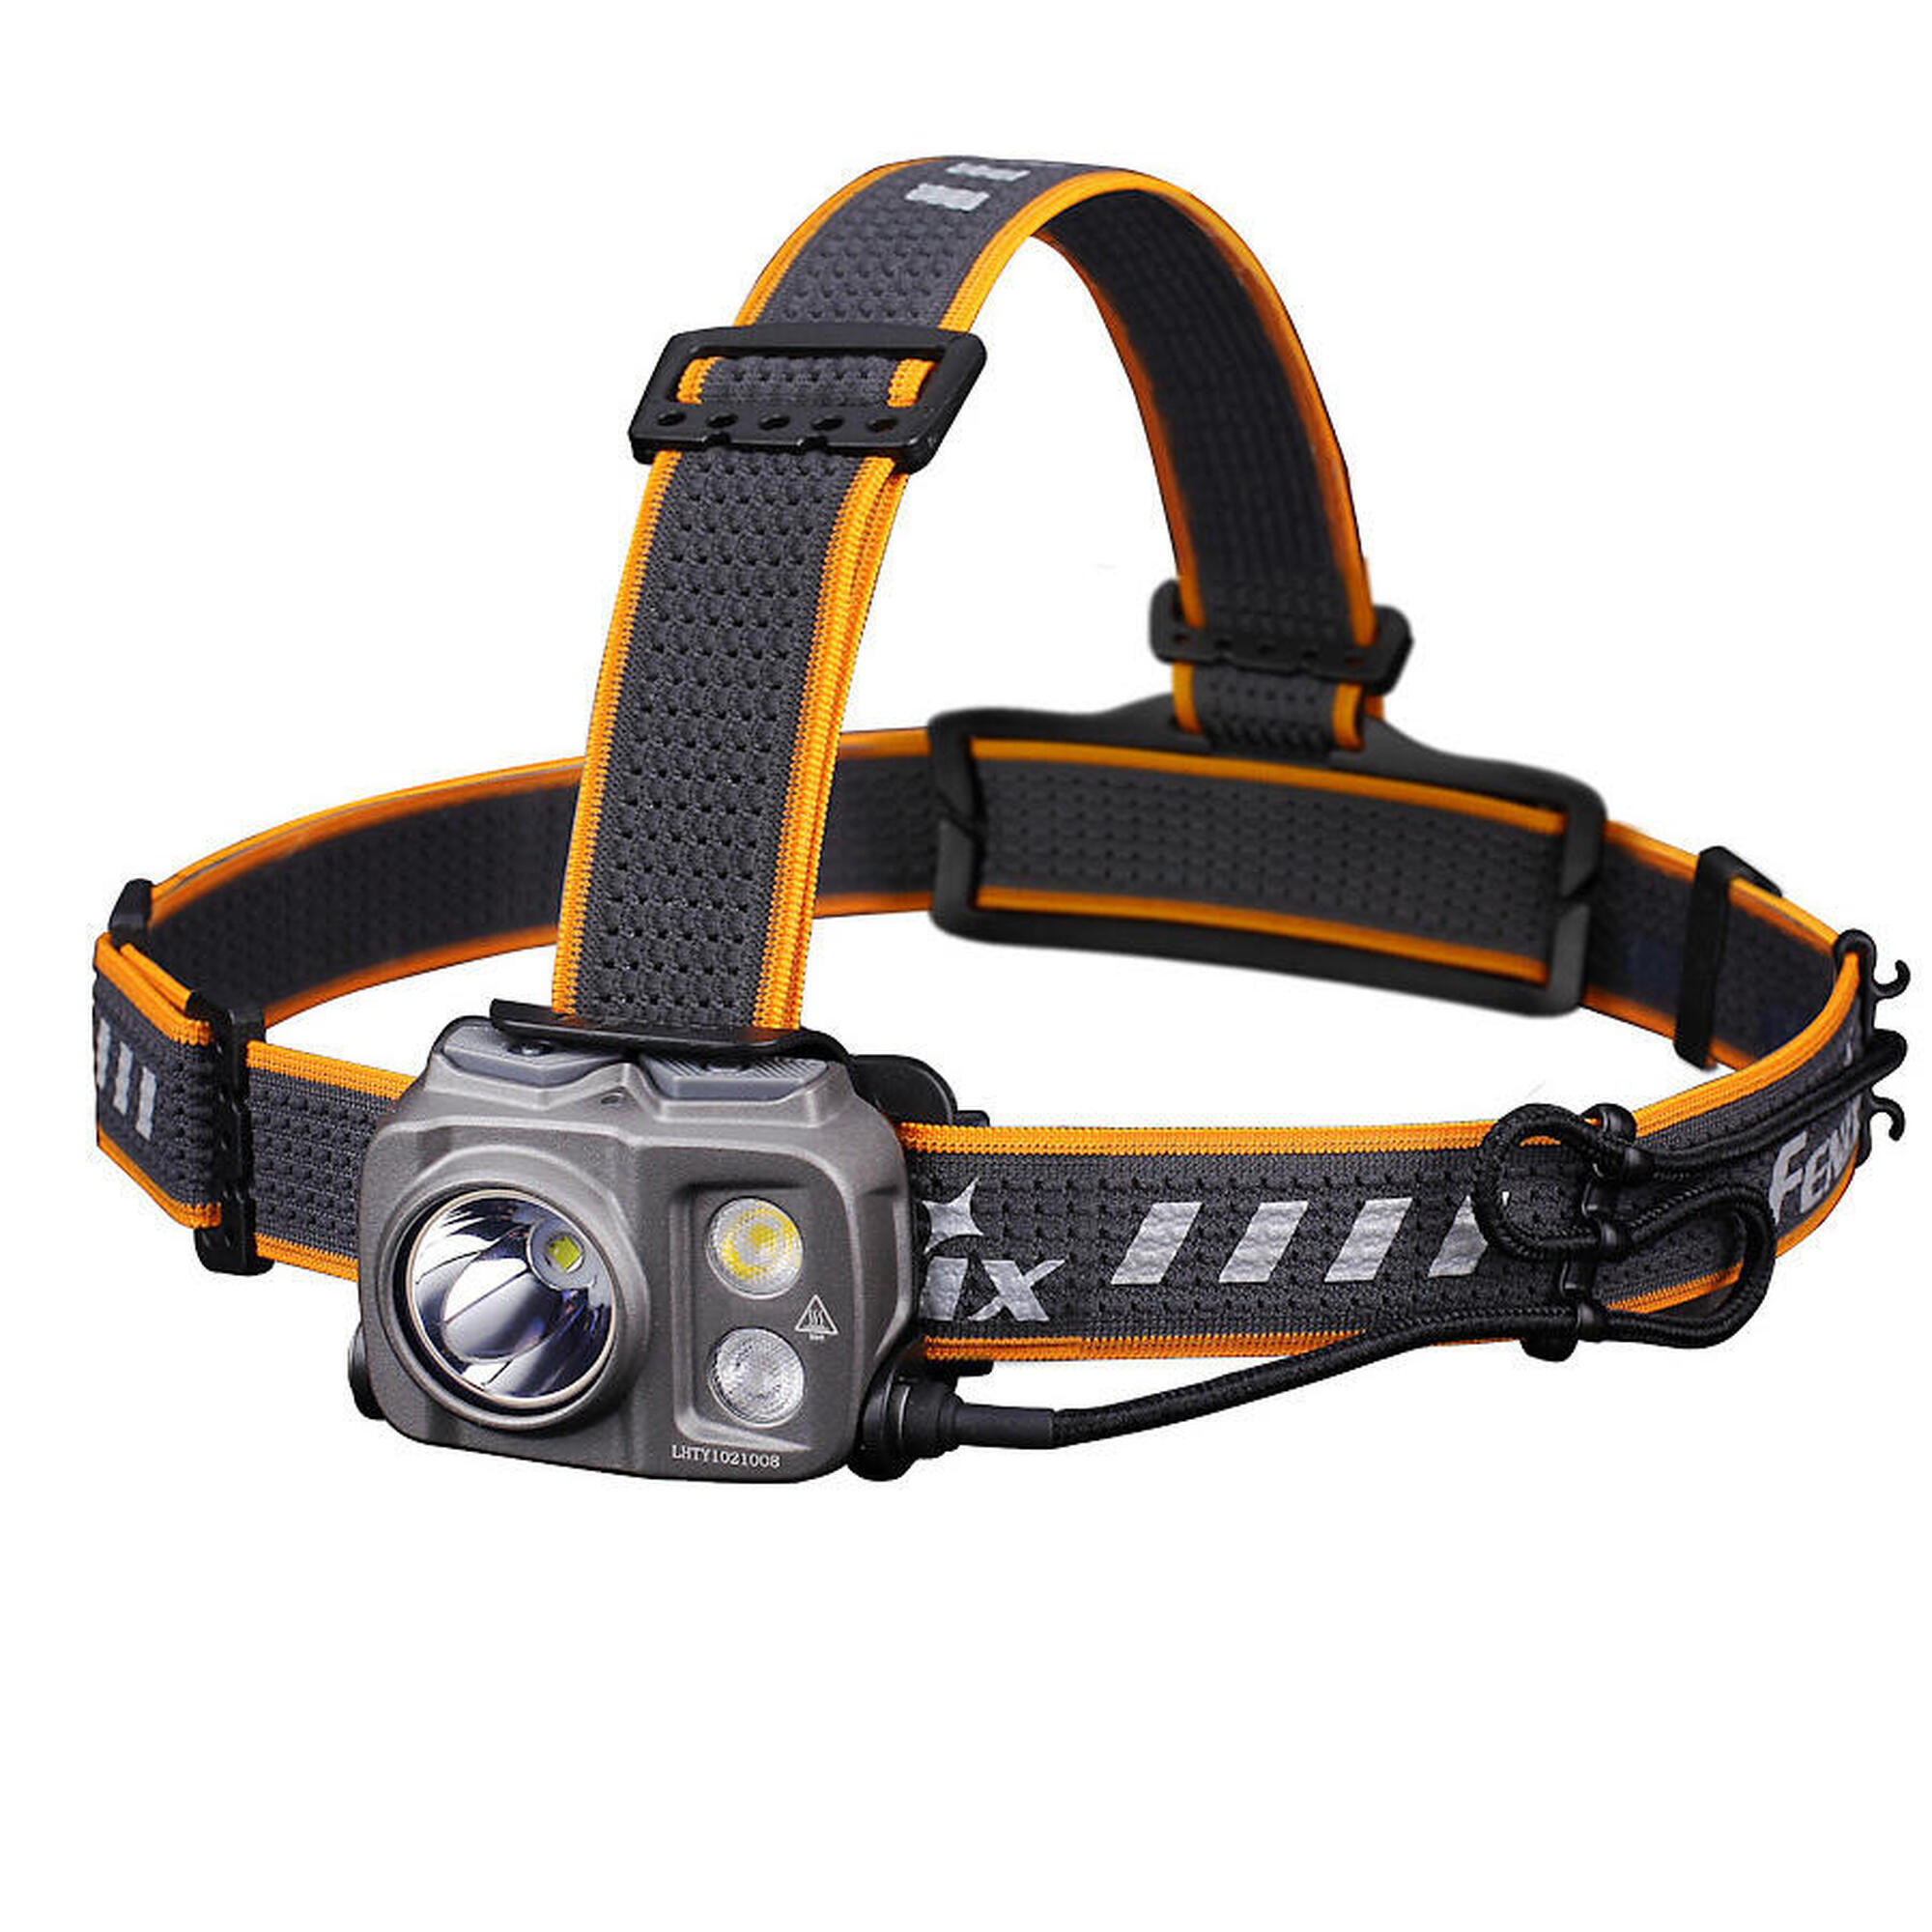 HP25R v2.0 1600 Lumen Rechargeable Search Headlamp 1/7